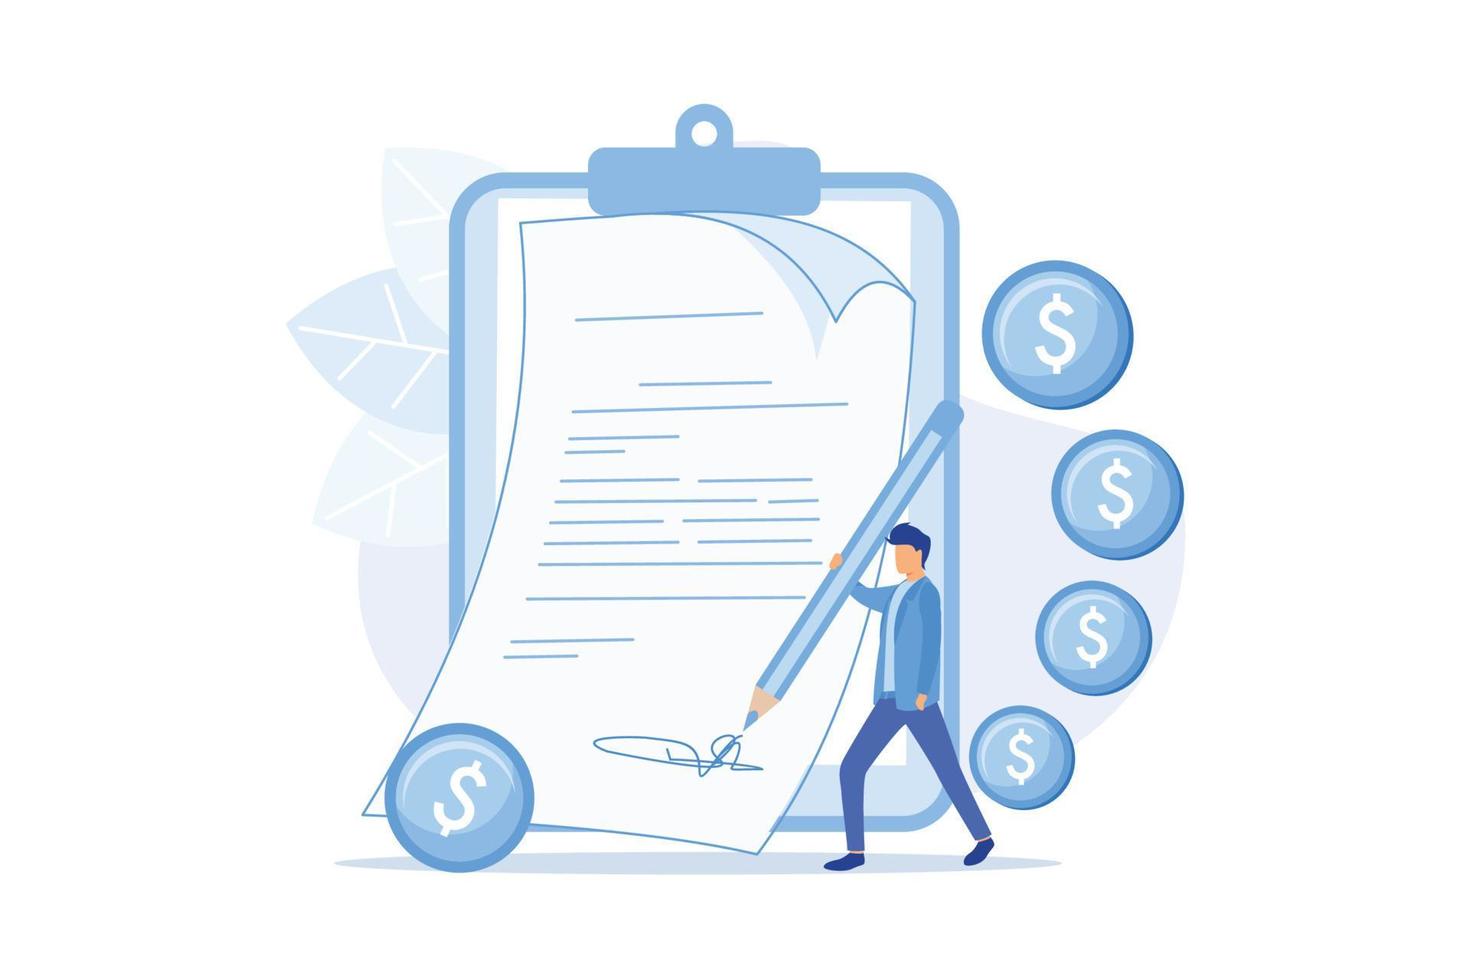 Man with pen writing signature on document. Licensing signing, pact arrangement, business agreement. Businessman making money deal cartoon character. Vector ILLUSTRATION